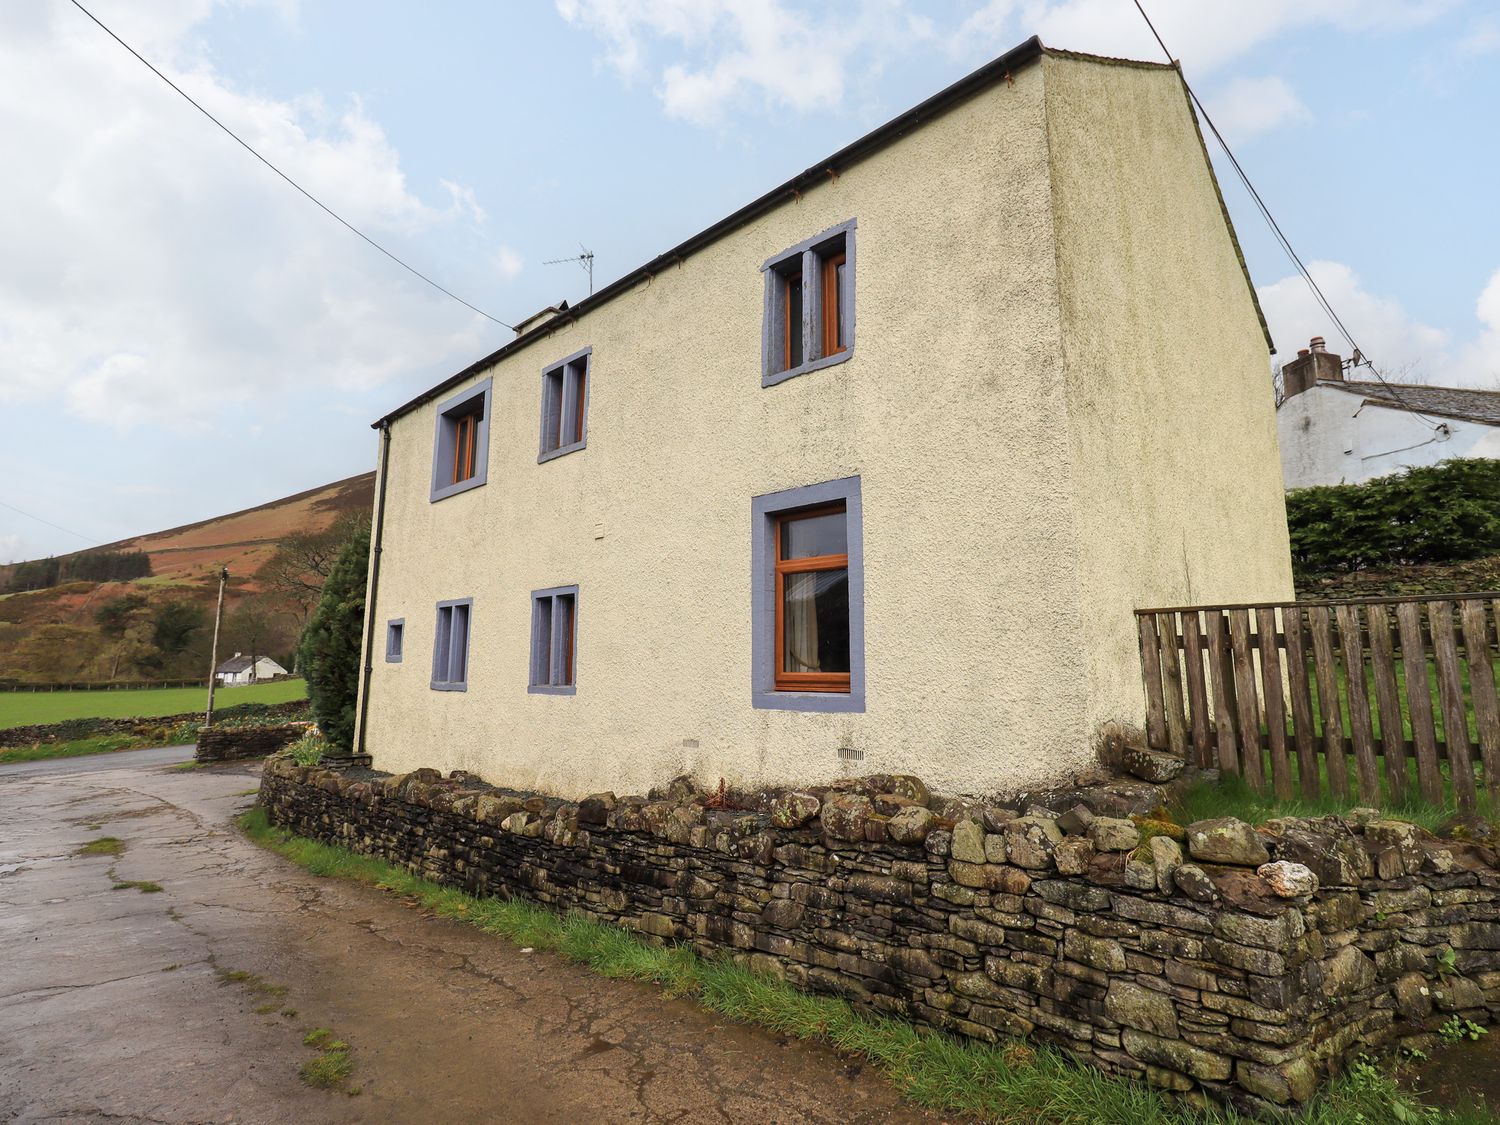 Scales Cottage - Lake District - 972335 - photo 1